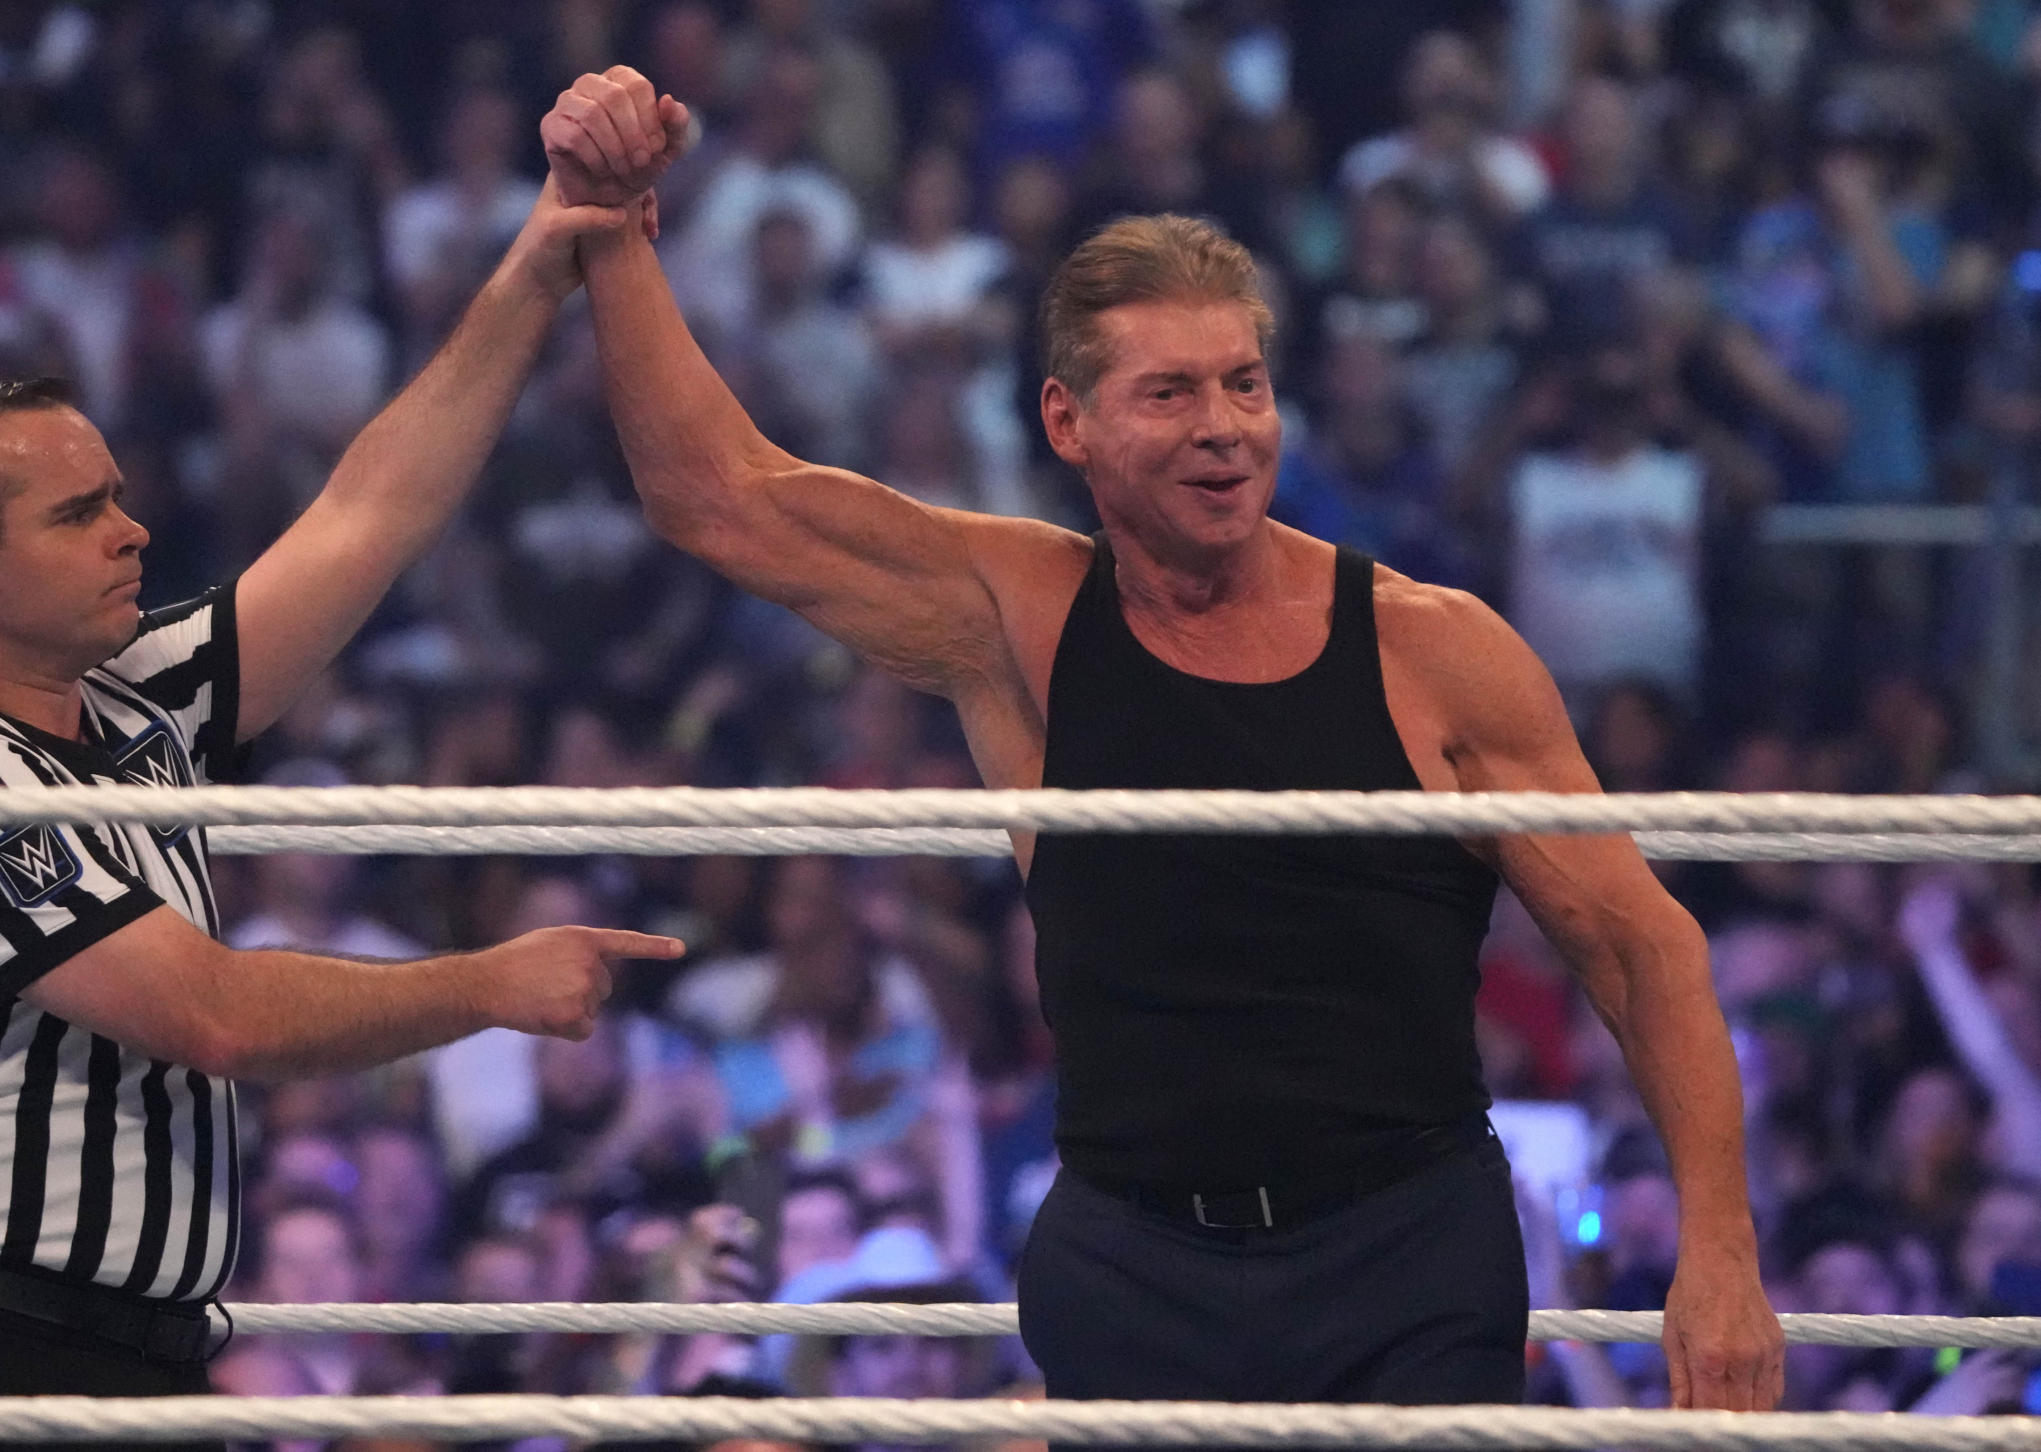 Vince McMahon apparently ends retirement, shockingly returns to WWE in key role